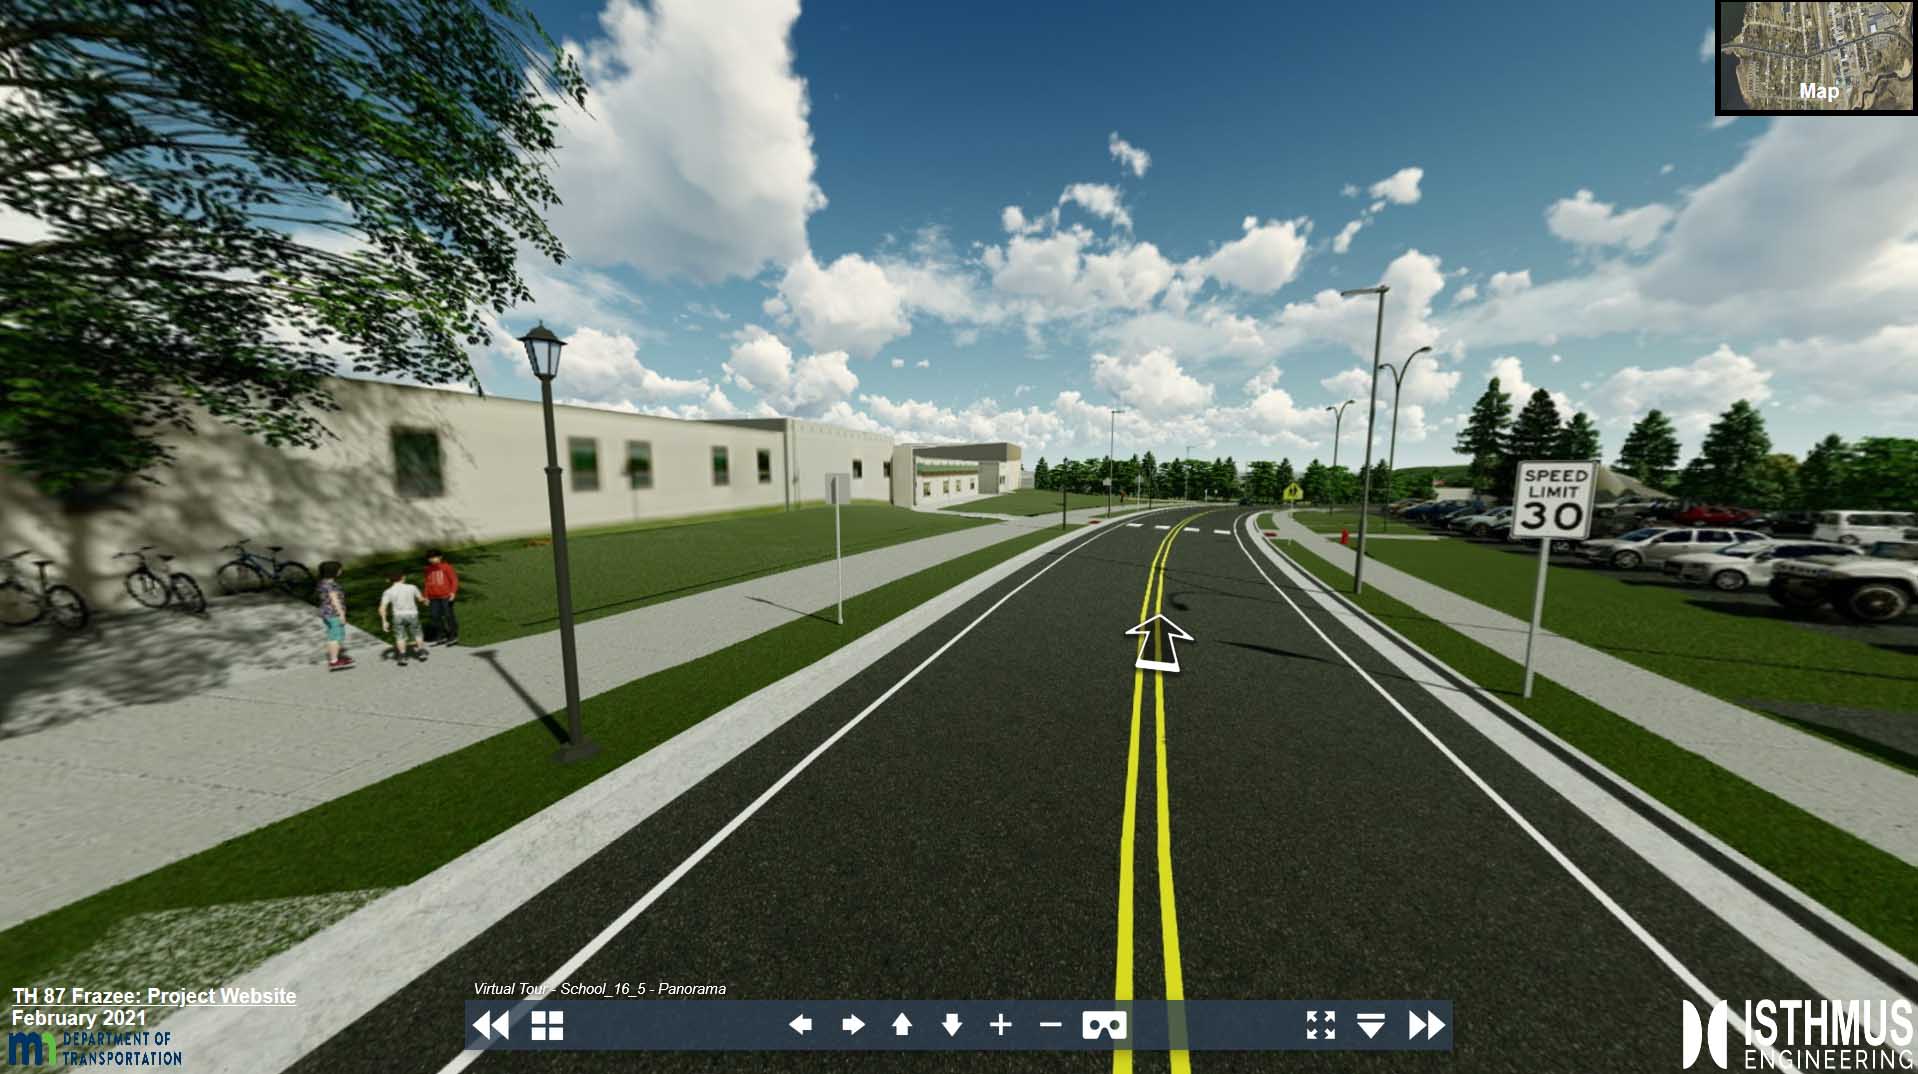 Hwy 87 Complete Streets Project Frazee 360 degree project tour.